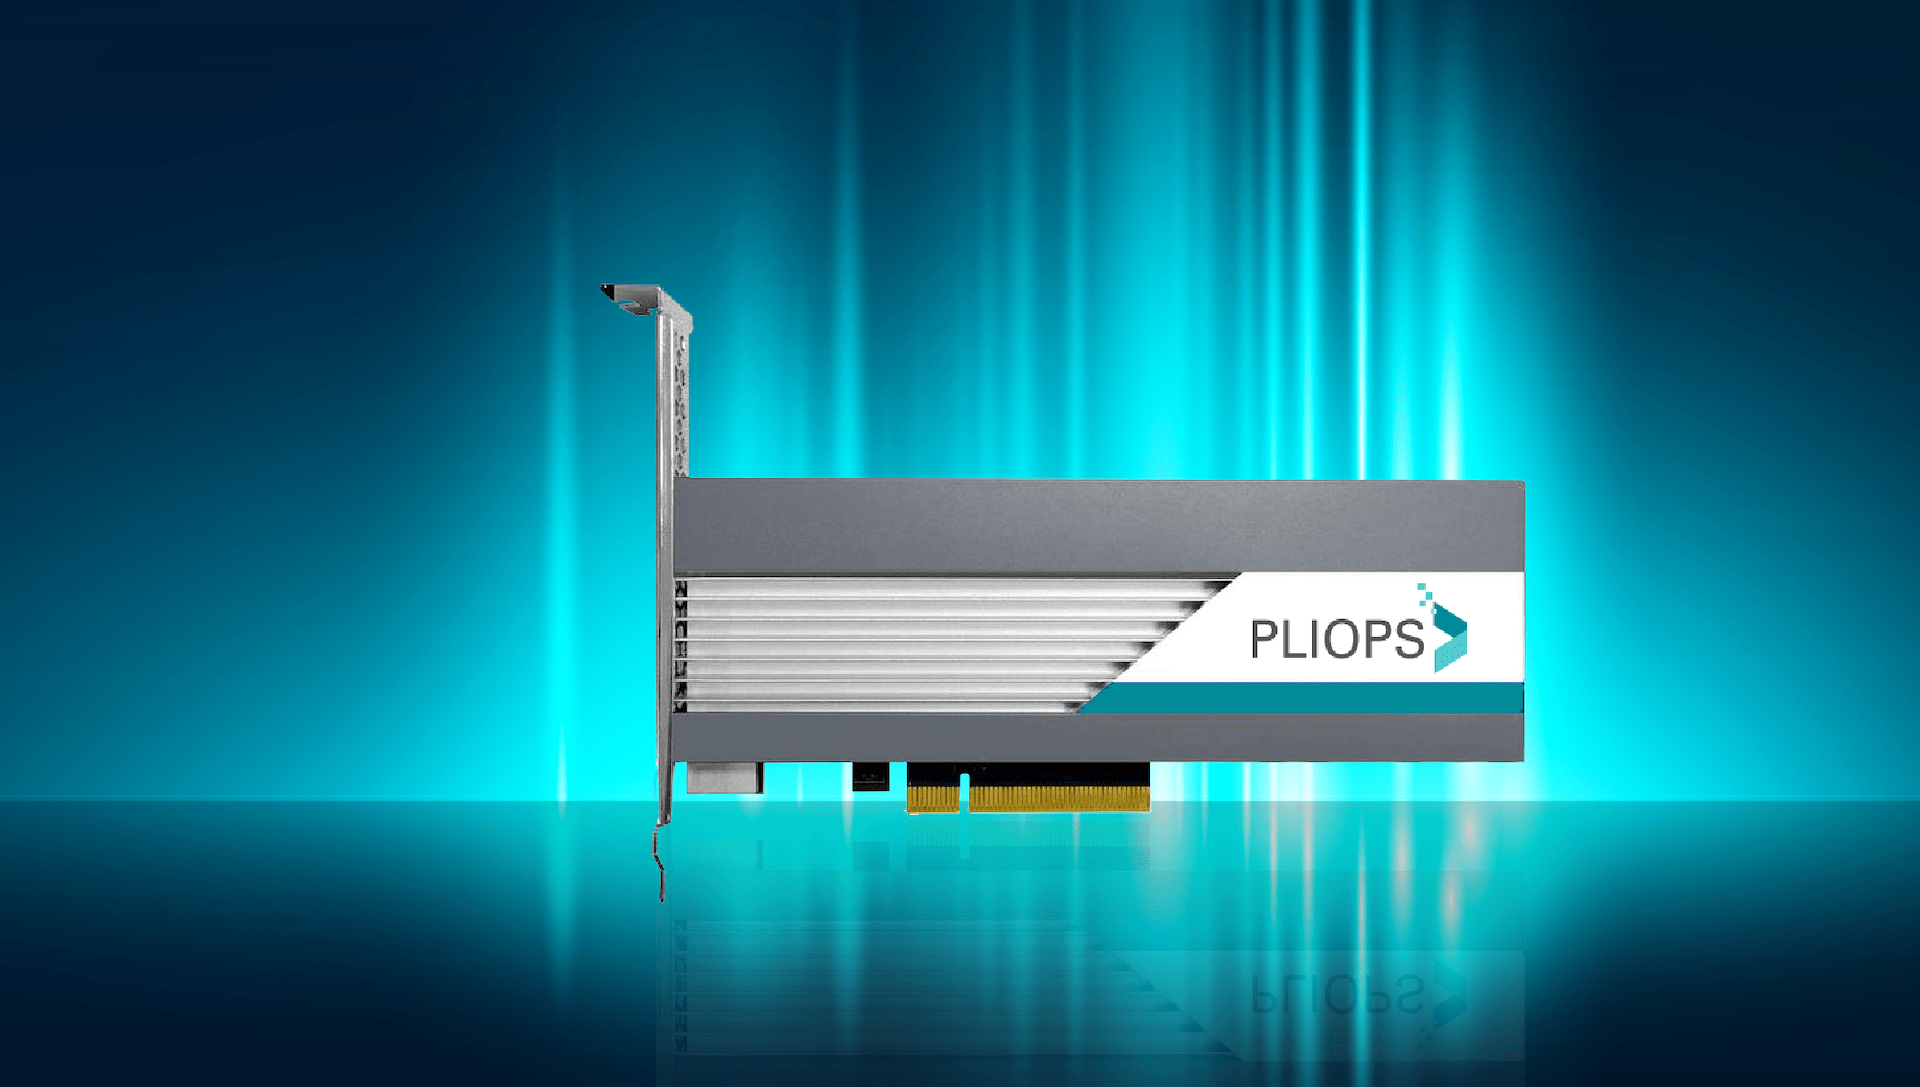 Pliops lands $100M for chips that accelerate analytics in data centers